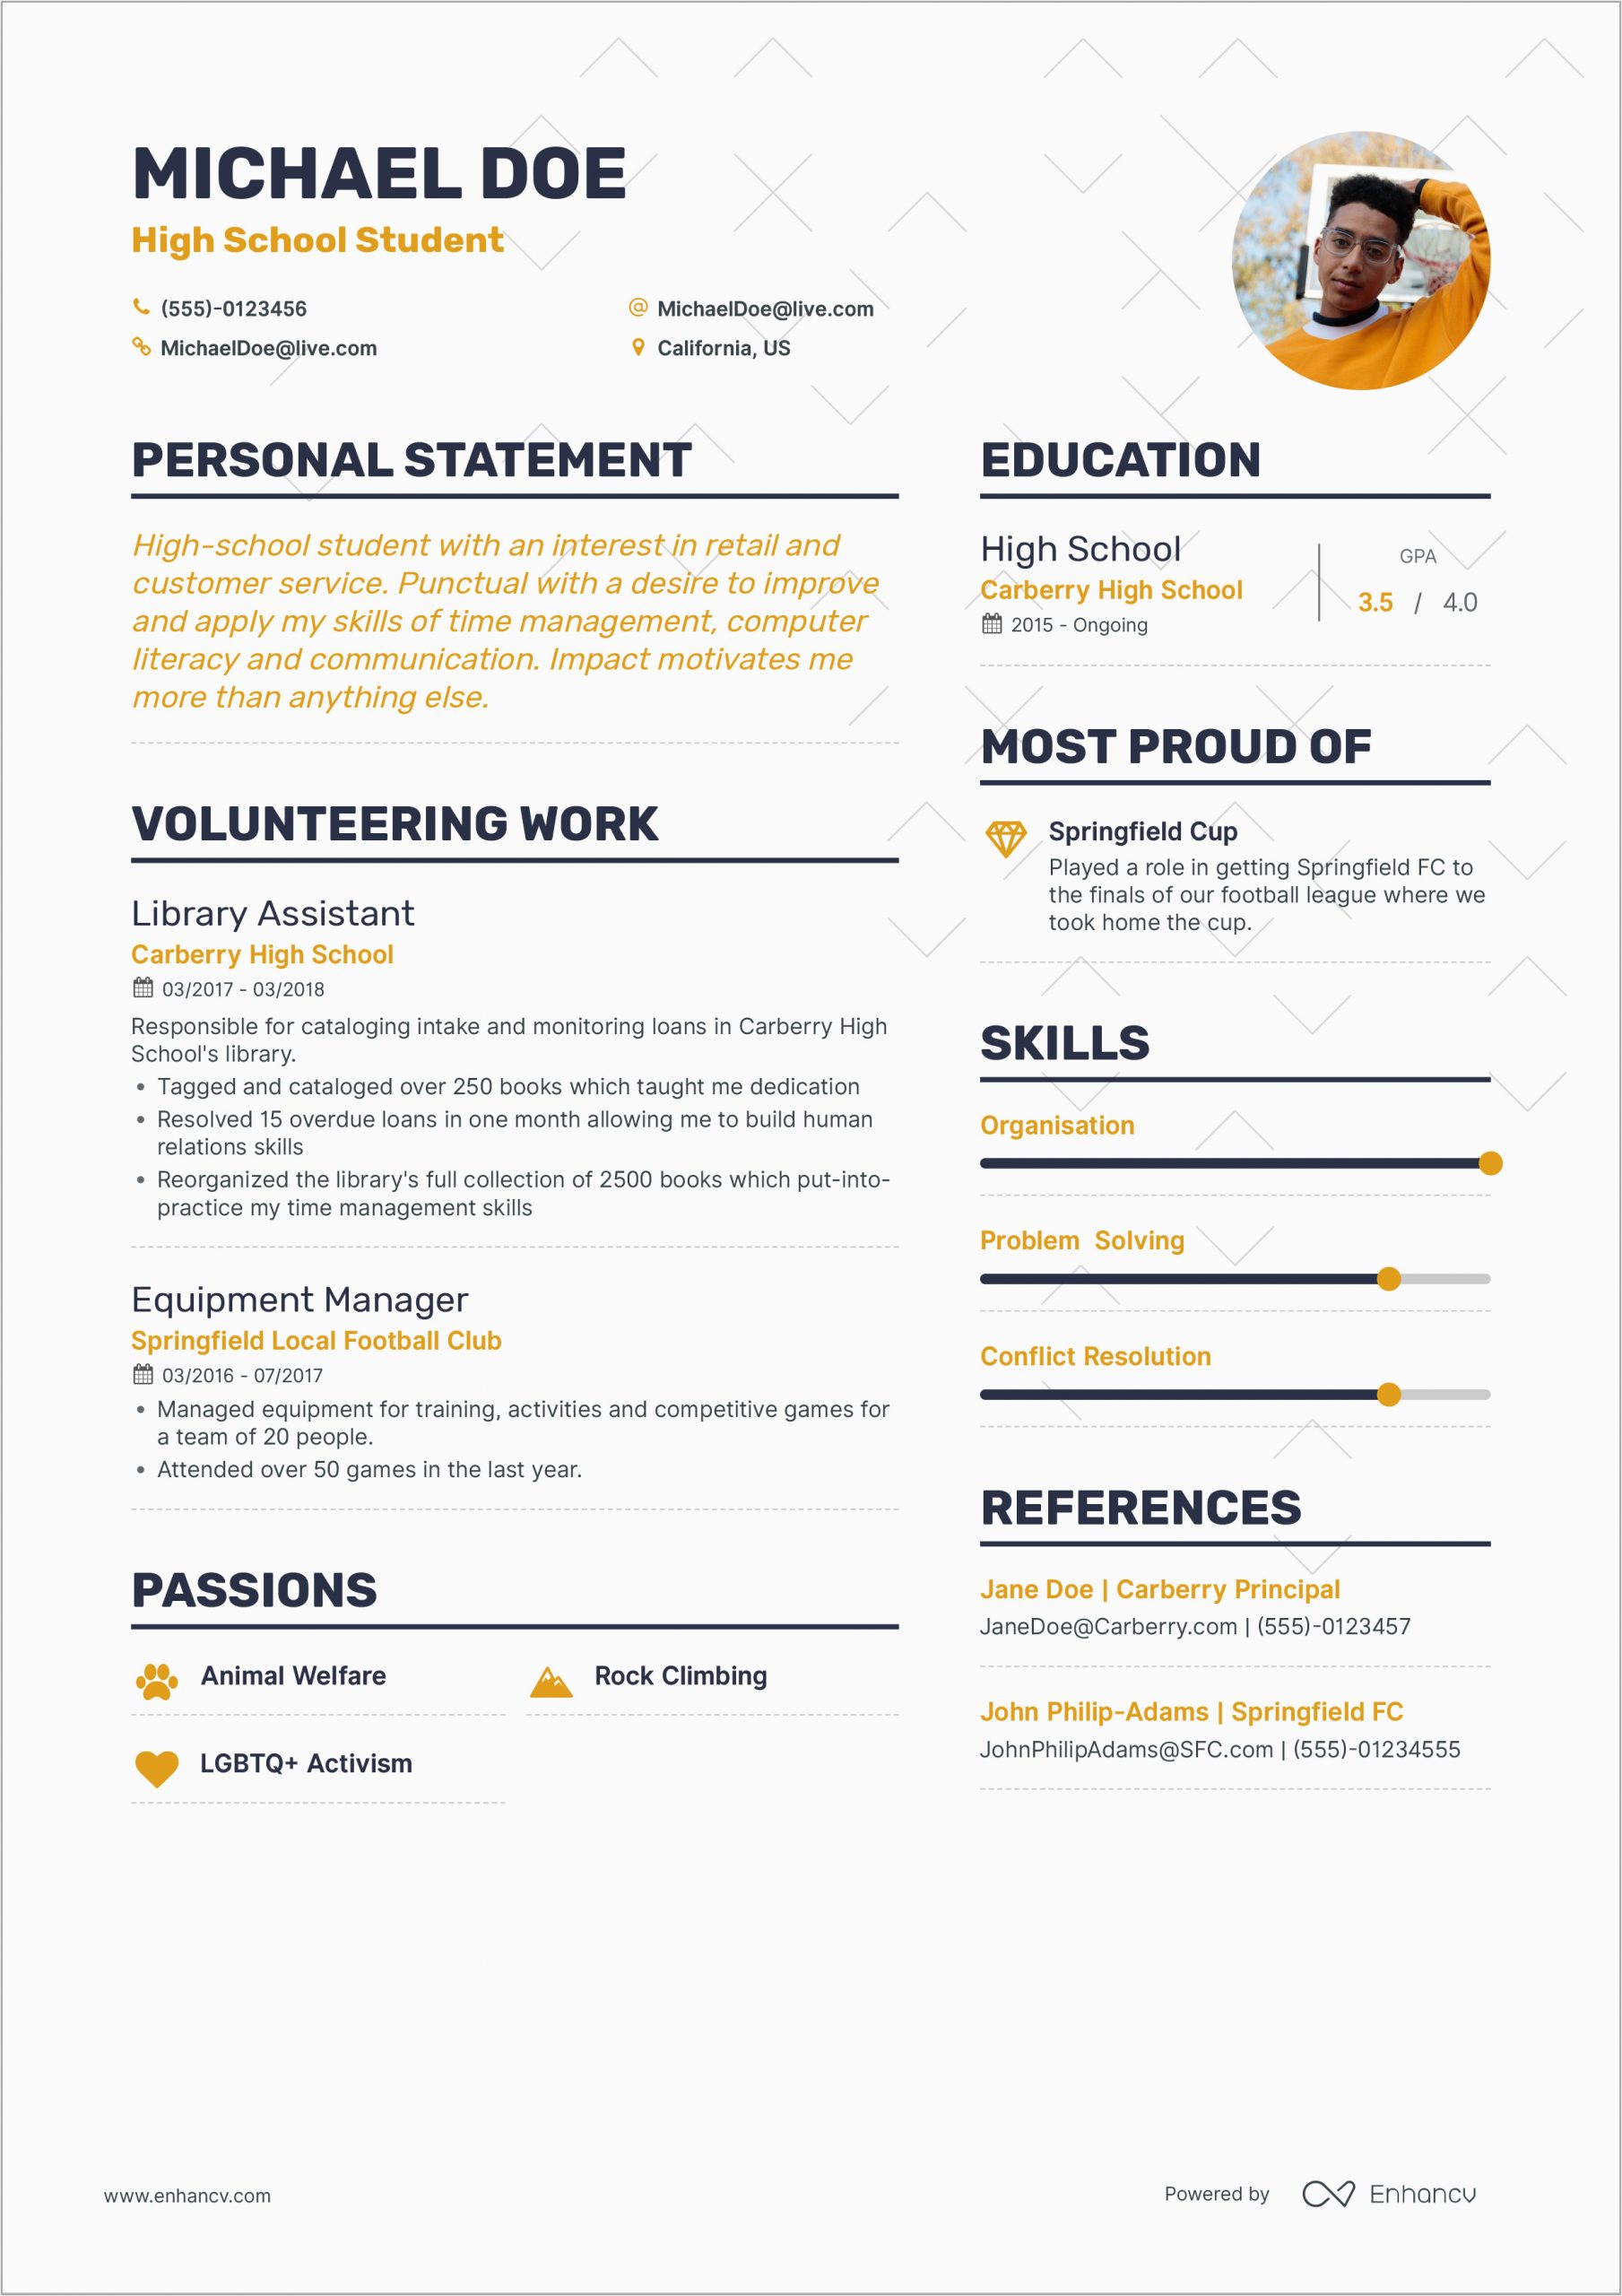 Resume Objective Sample for First Job First Job Resume